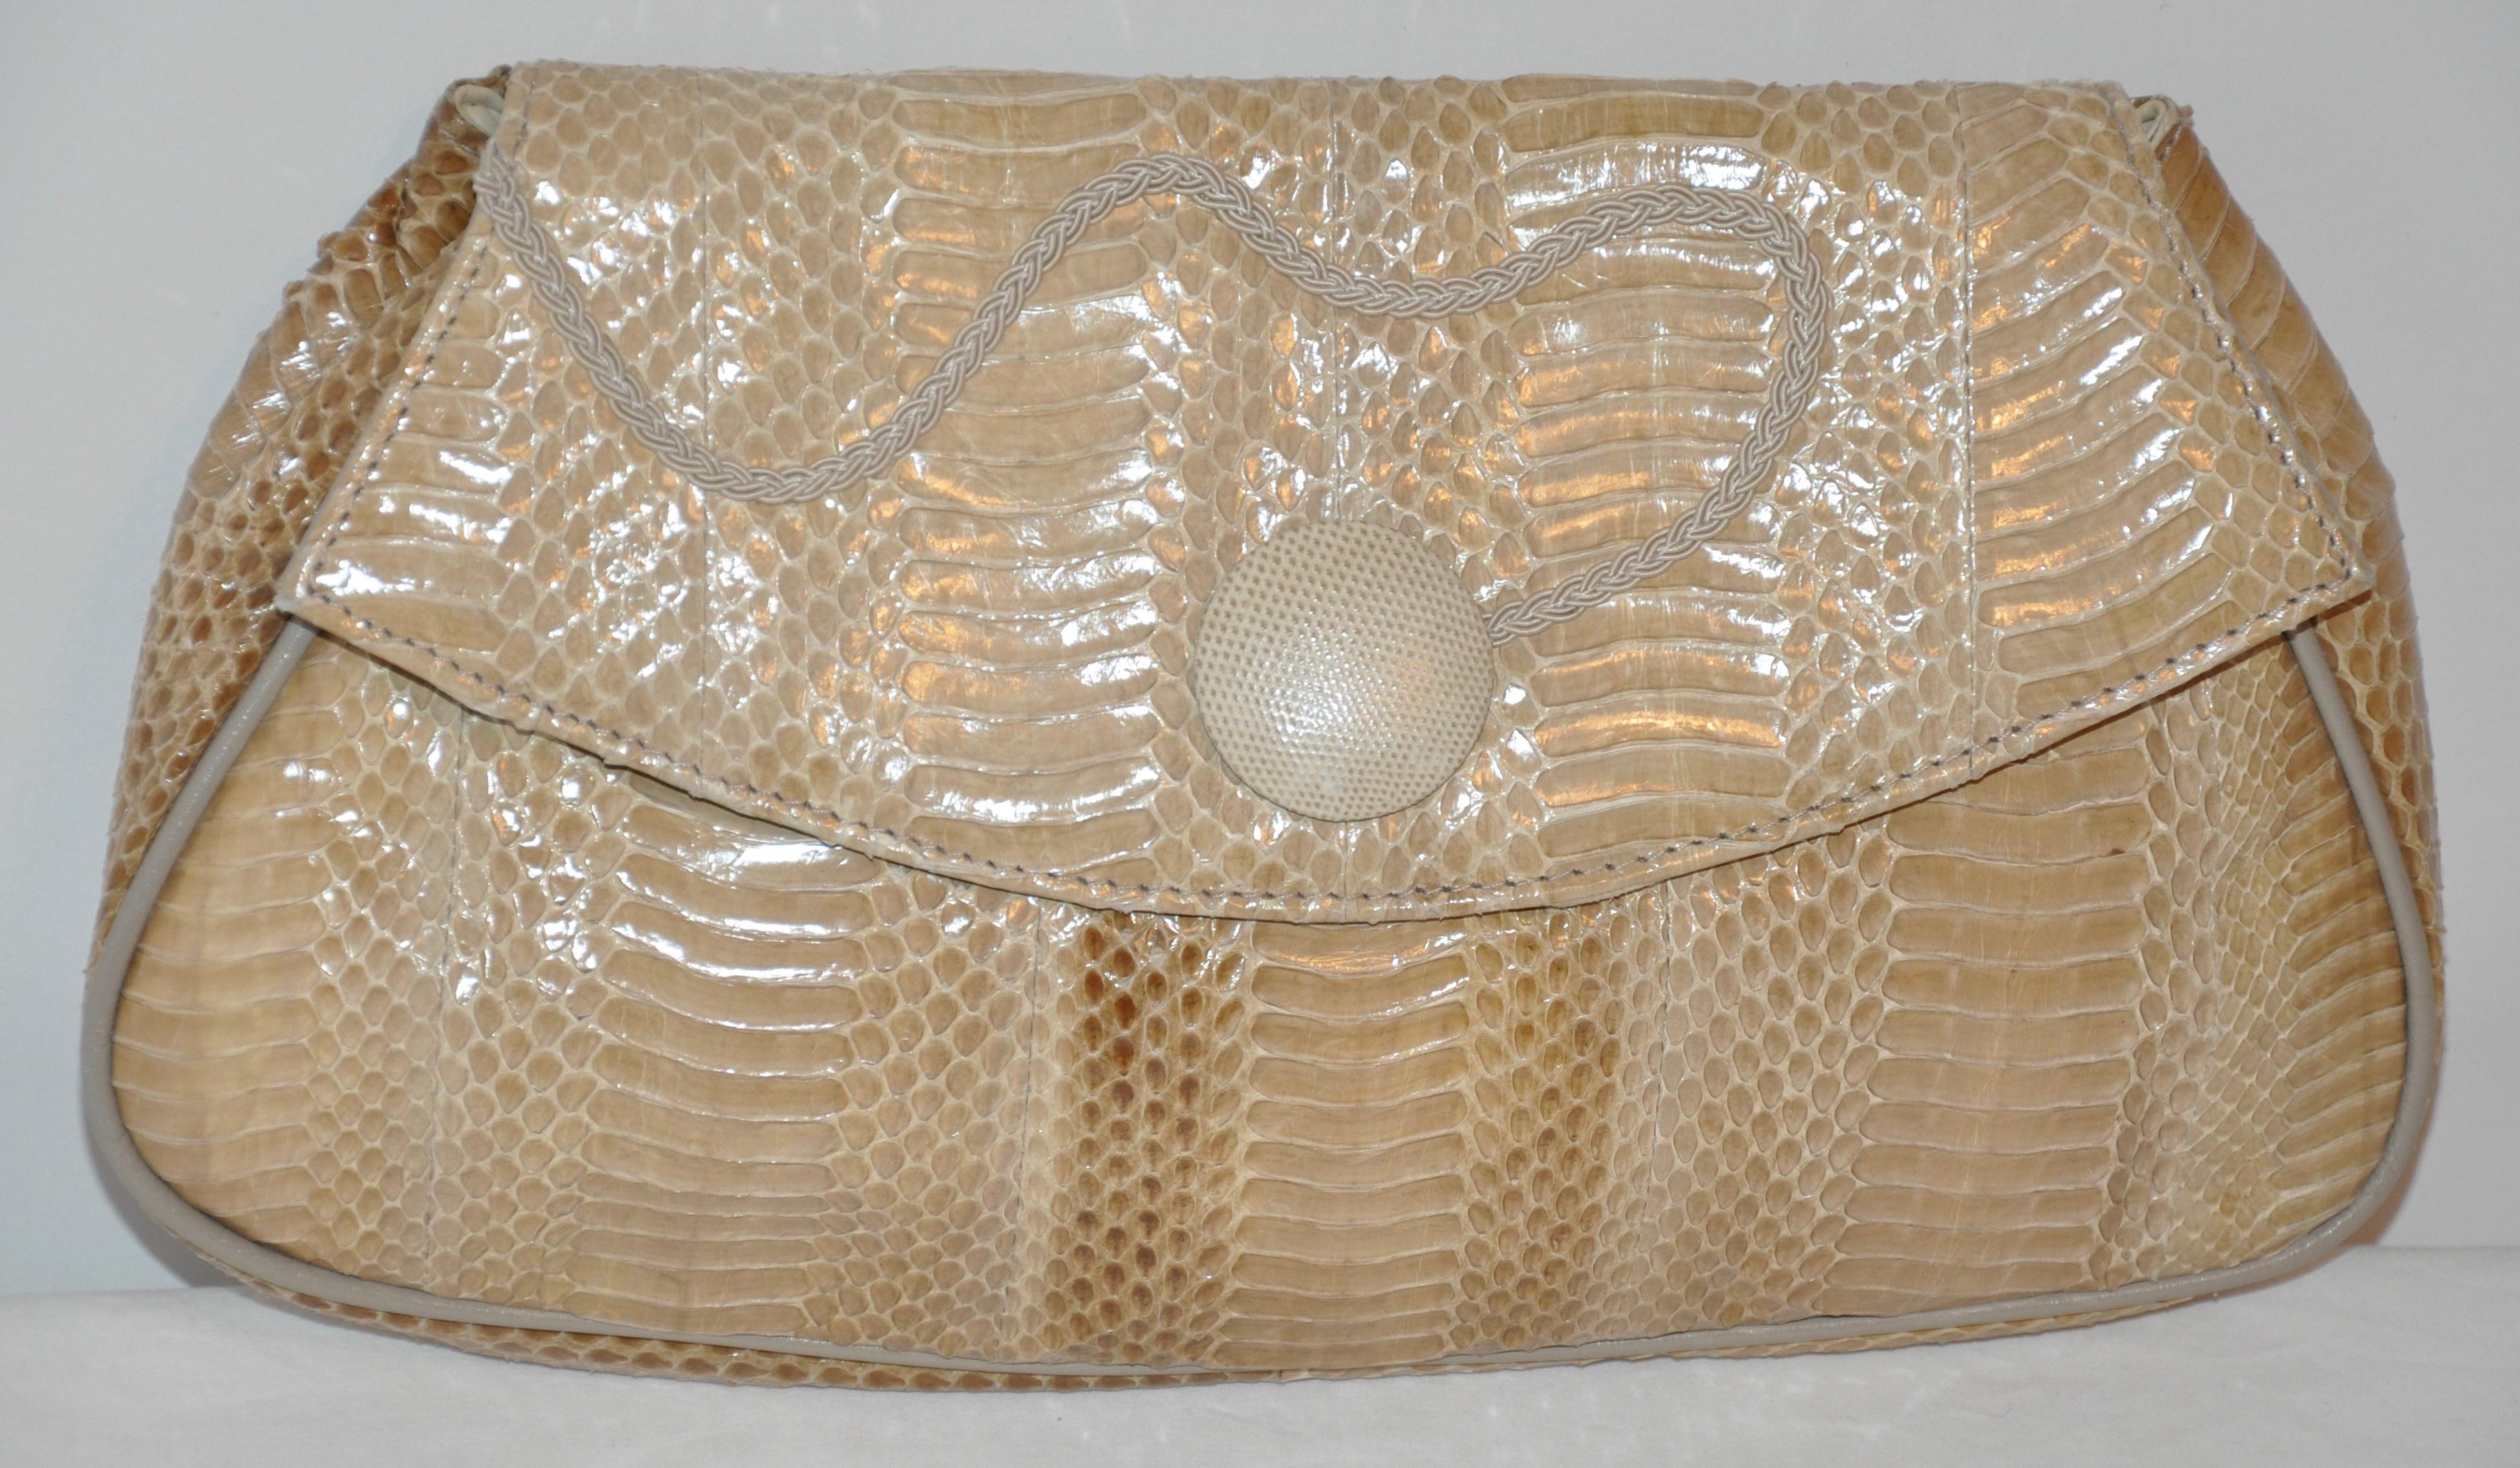     This wonderfully elegant combination of beiges and brown snakeskin clutch has an optional shoulder strap nicely tucked inside the interior zippered compartment. Clutch measures 13 inches in length, 7 1/2 inches in height and 2 1/2 inches in